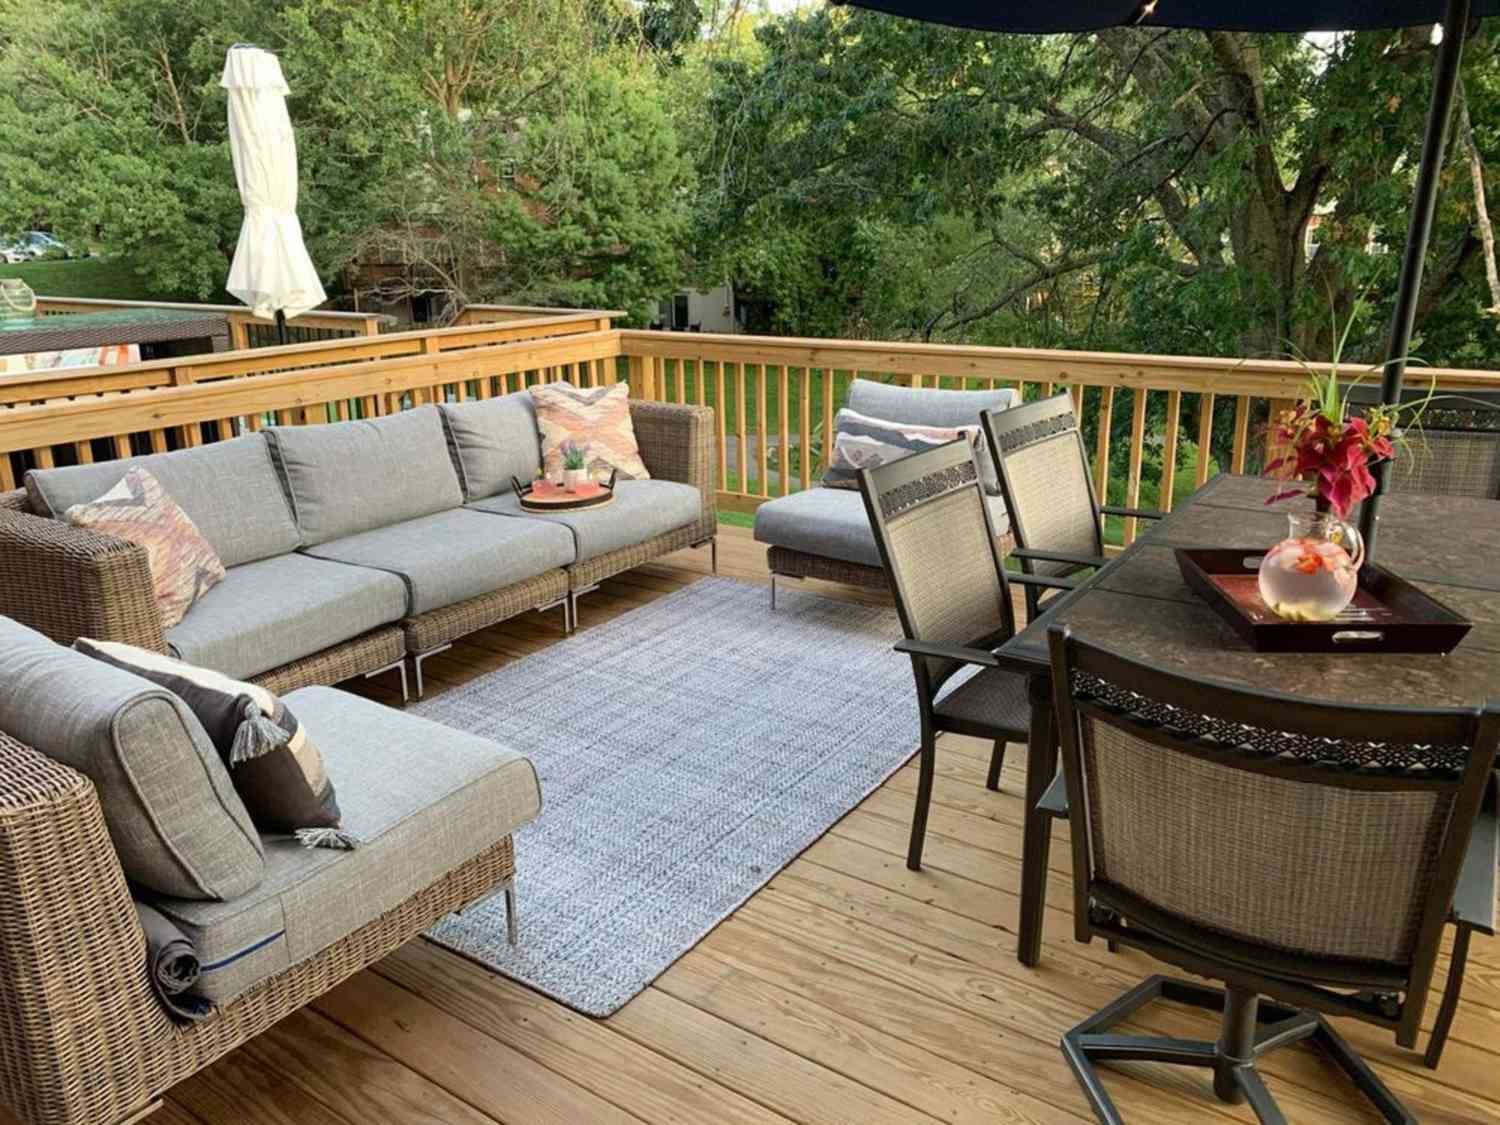 What Is The Best Material For An Outdoor Patio Rug